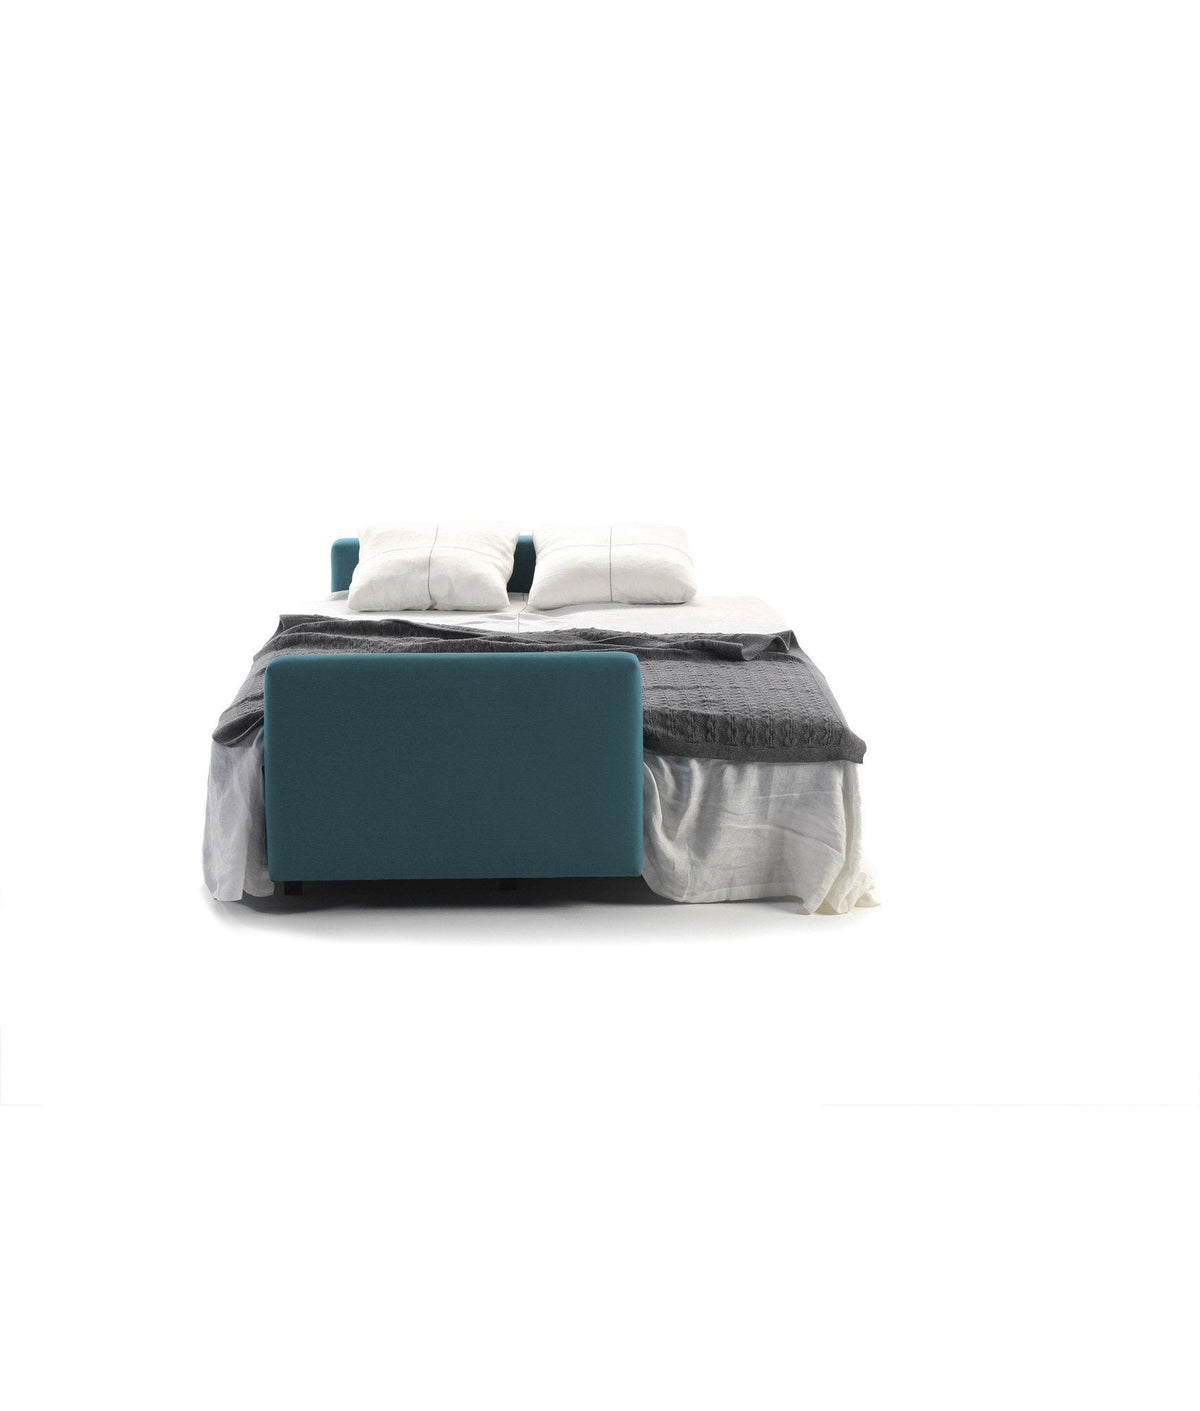 Nap Sofa Bed-Sancal-Contract Furniture Store